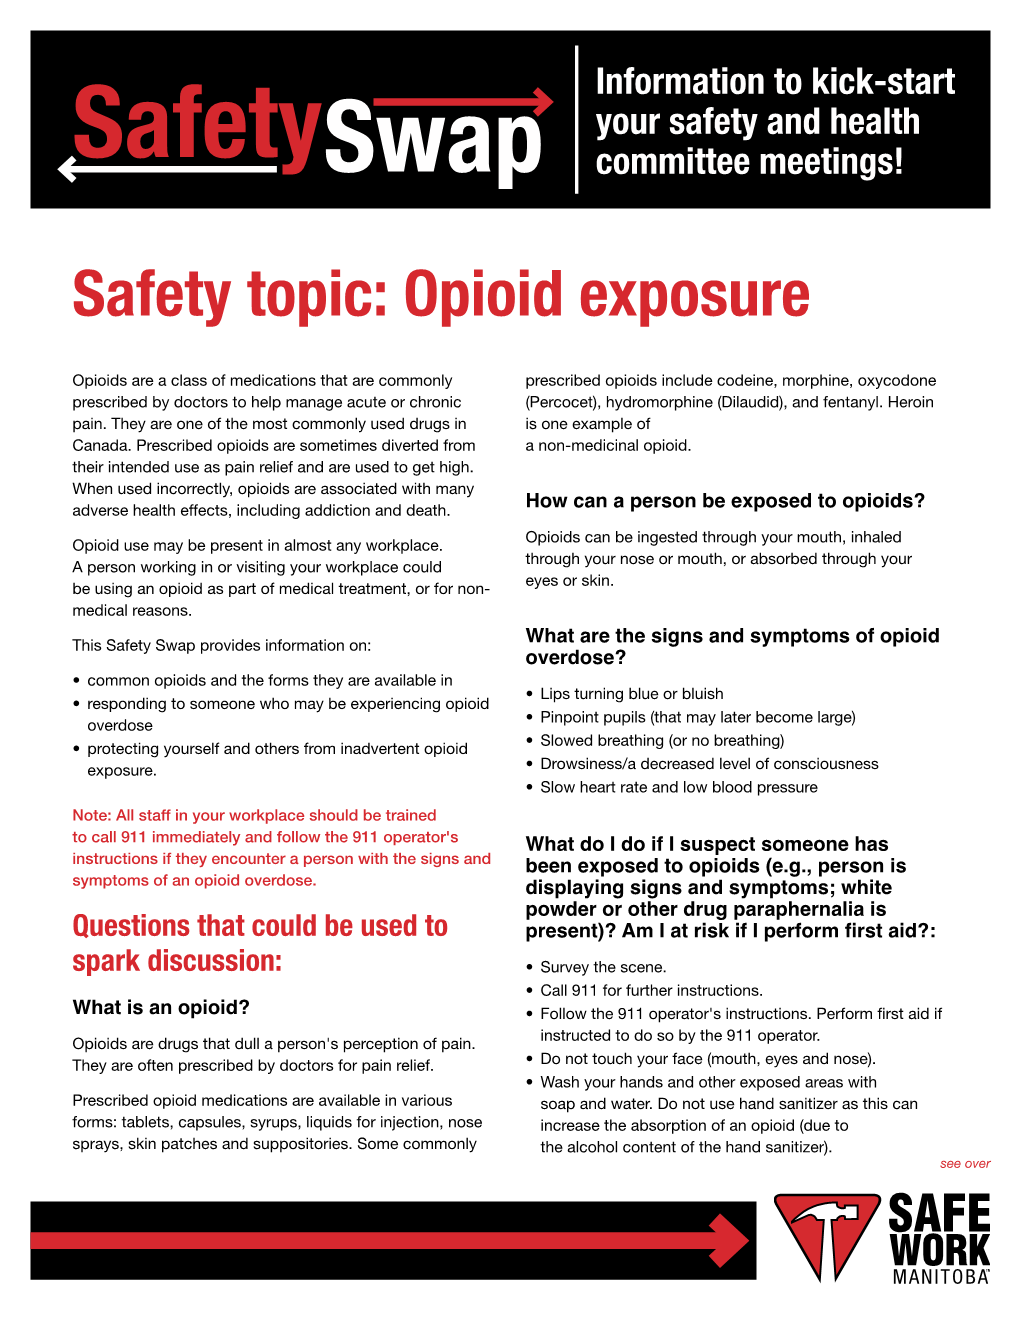 Safety Topic: Opioid Exposure